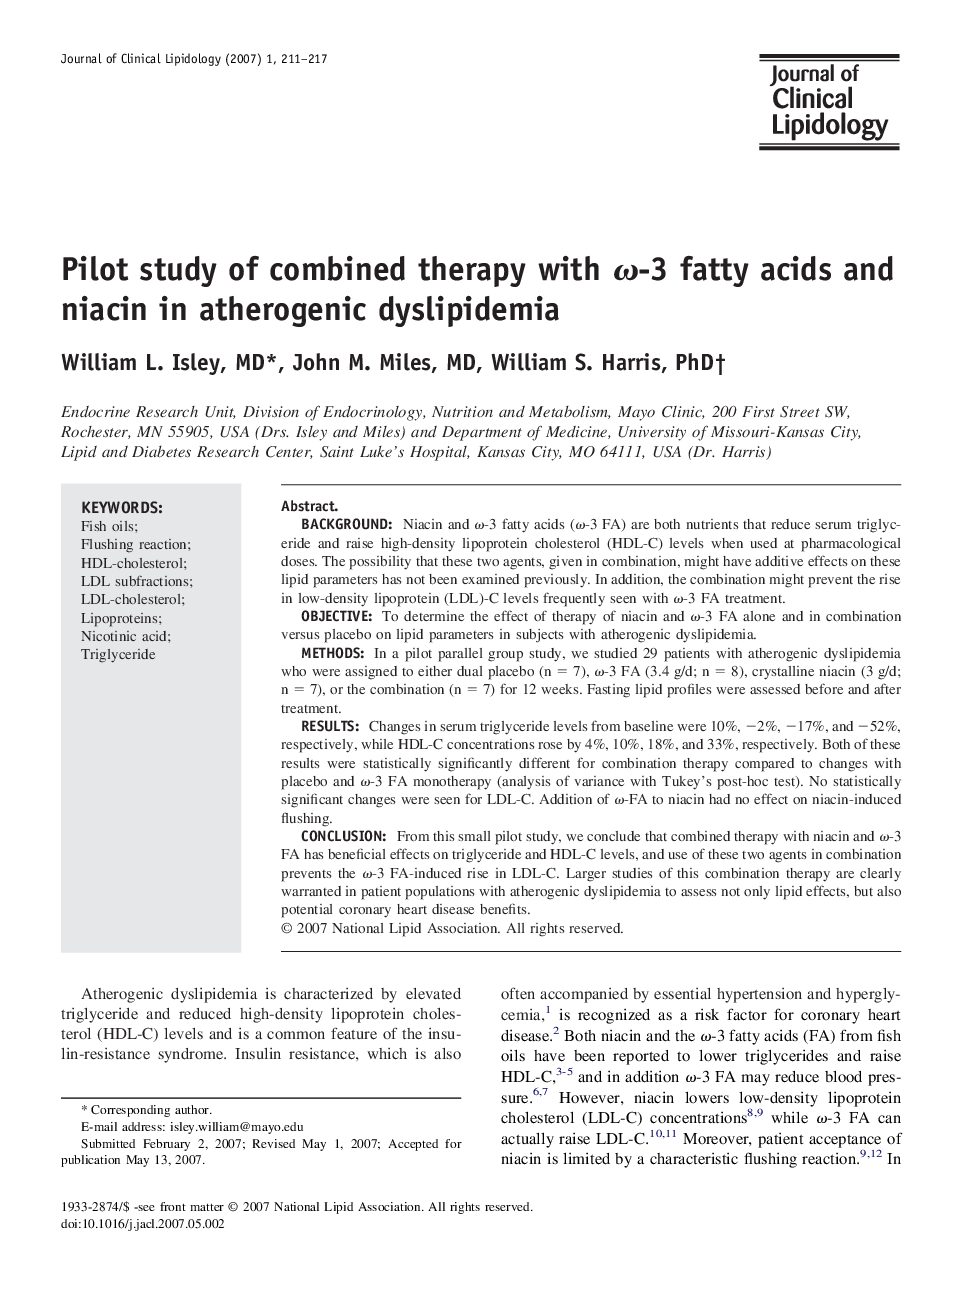 Pilot study of combined therapy with ω-3 fatty acids and niacin in atherogenic dyslipidemia